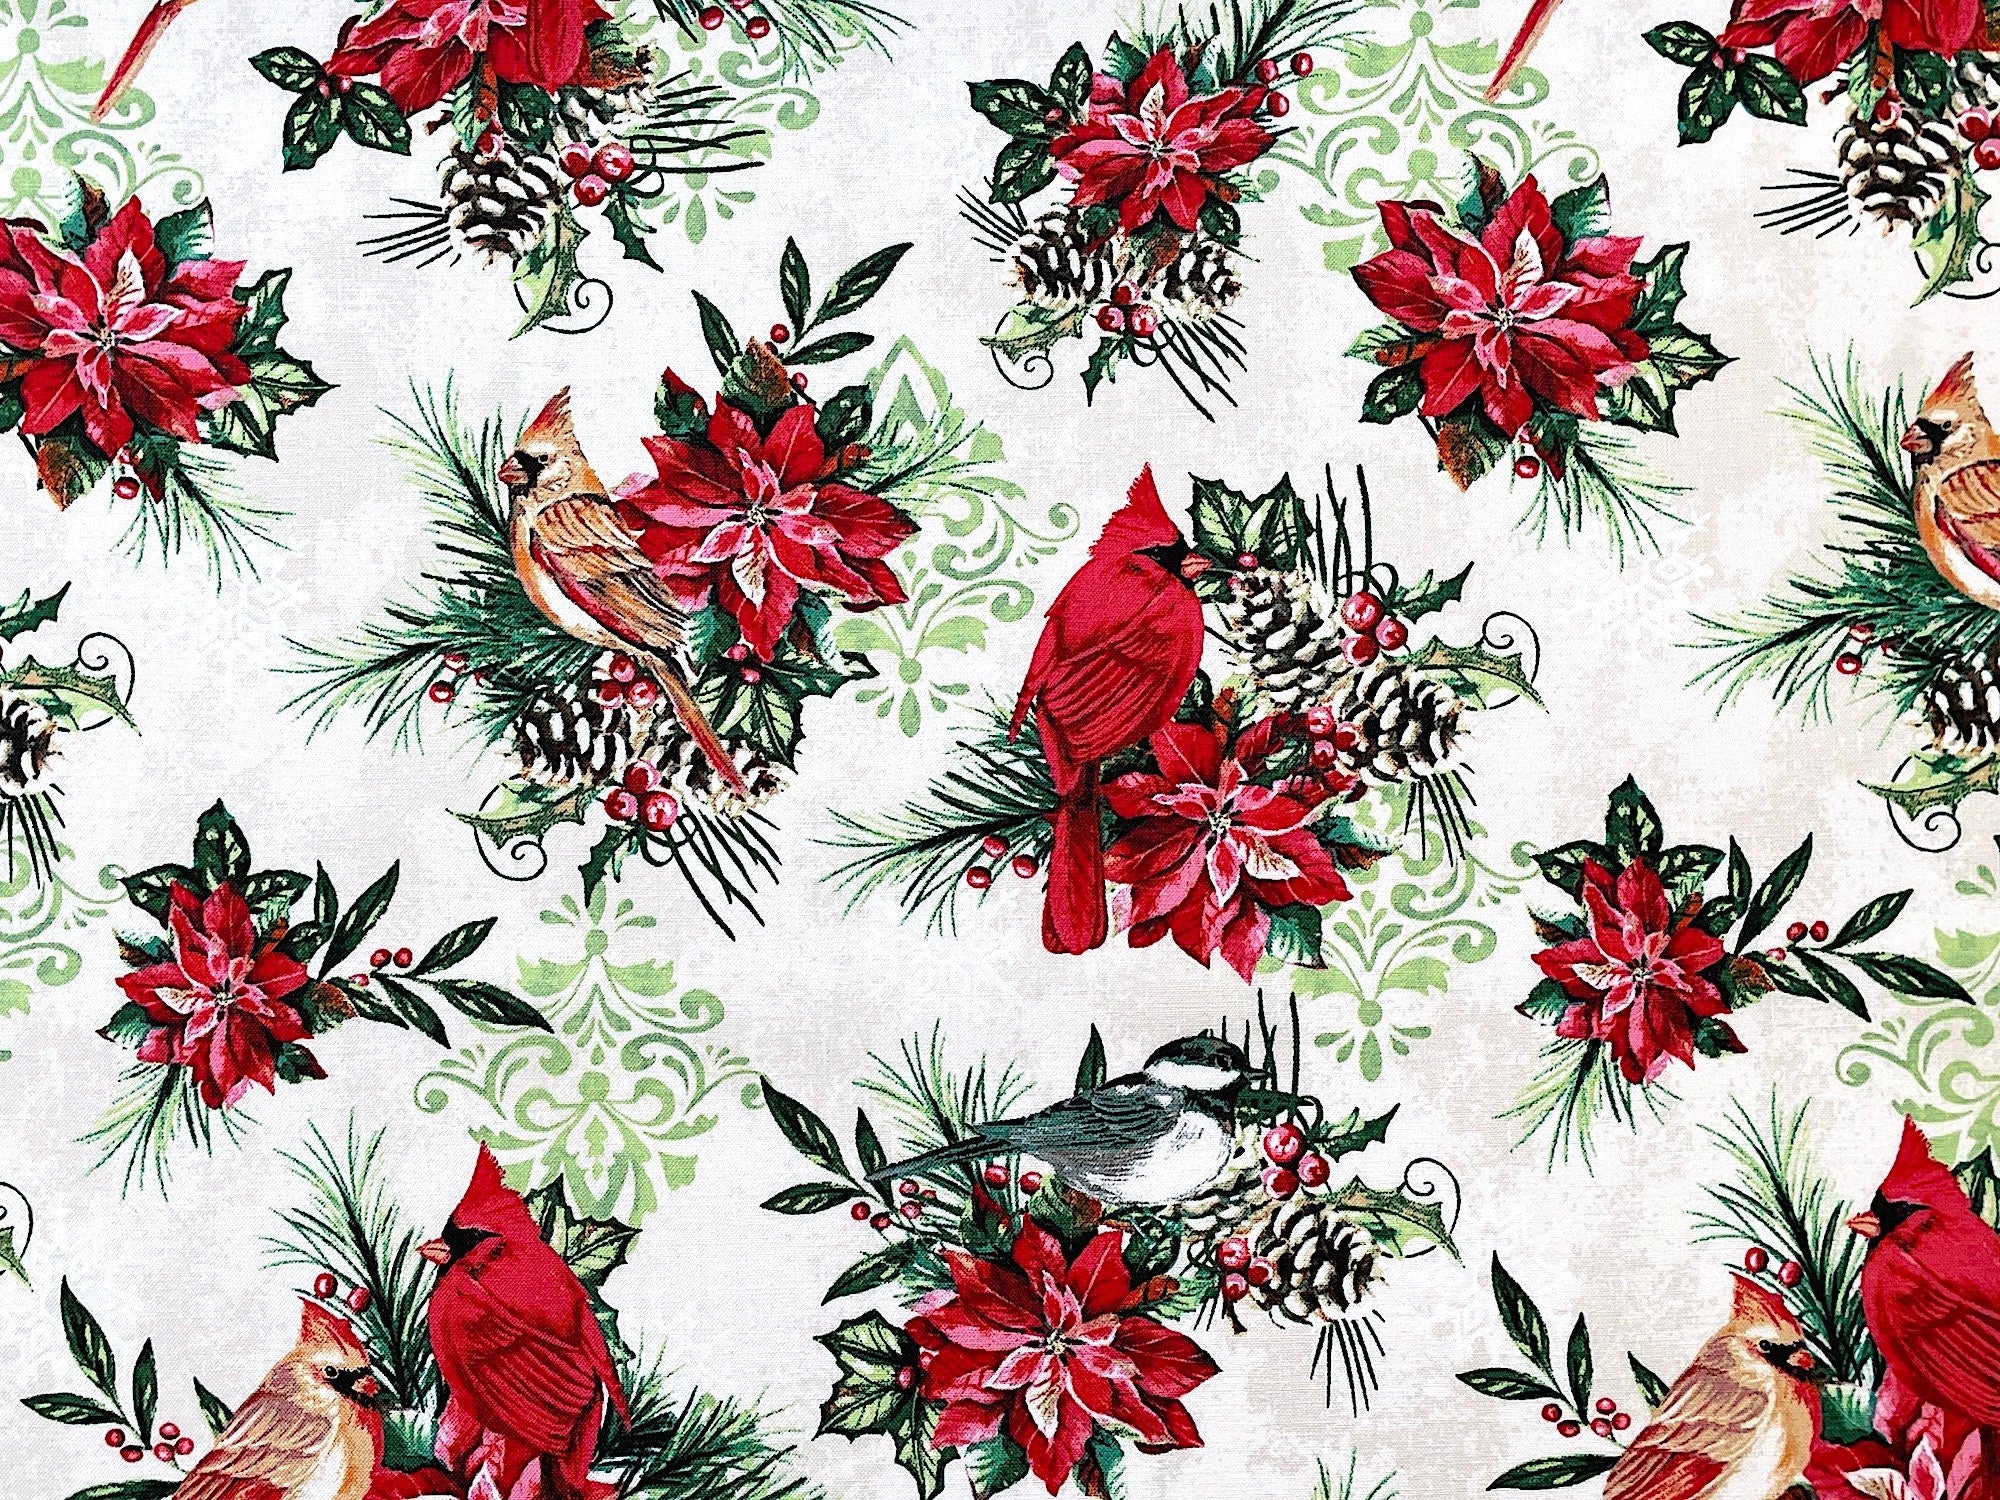 This fabric is part of the Holiday Greetings collection by Jean Plout. This Ivory colored fabric is covered with red cardinals sitting on branches made up of leaves, pine cones, poinsettias and leaves